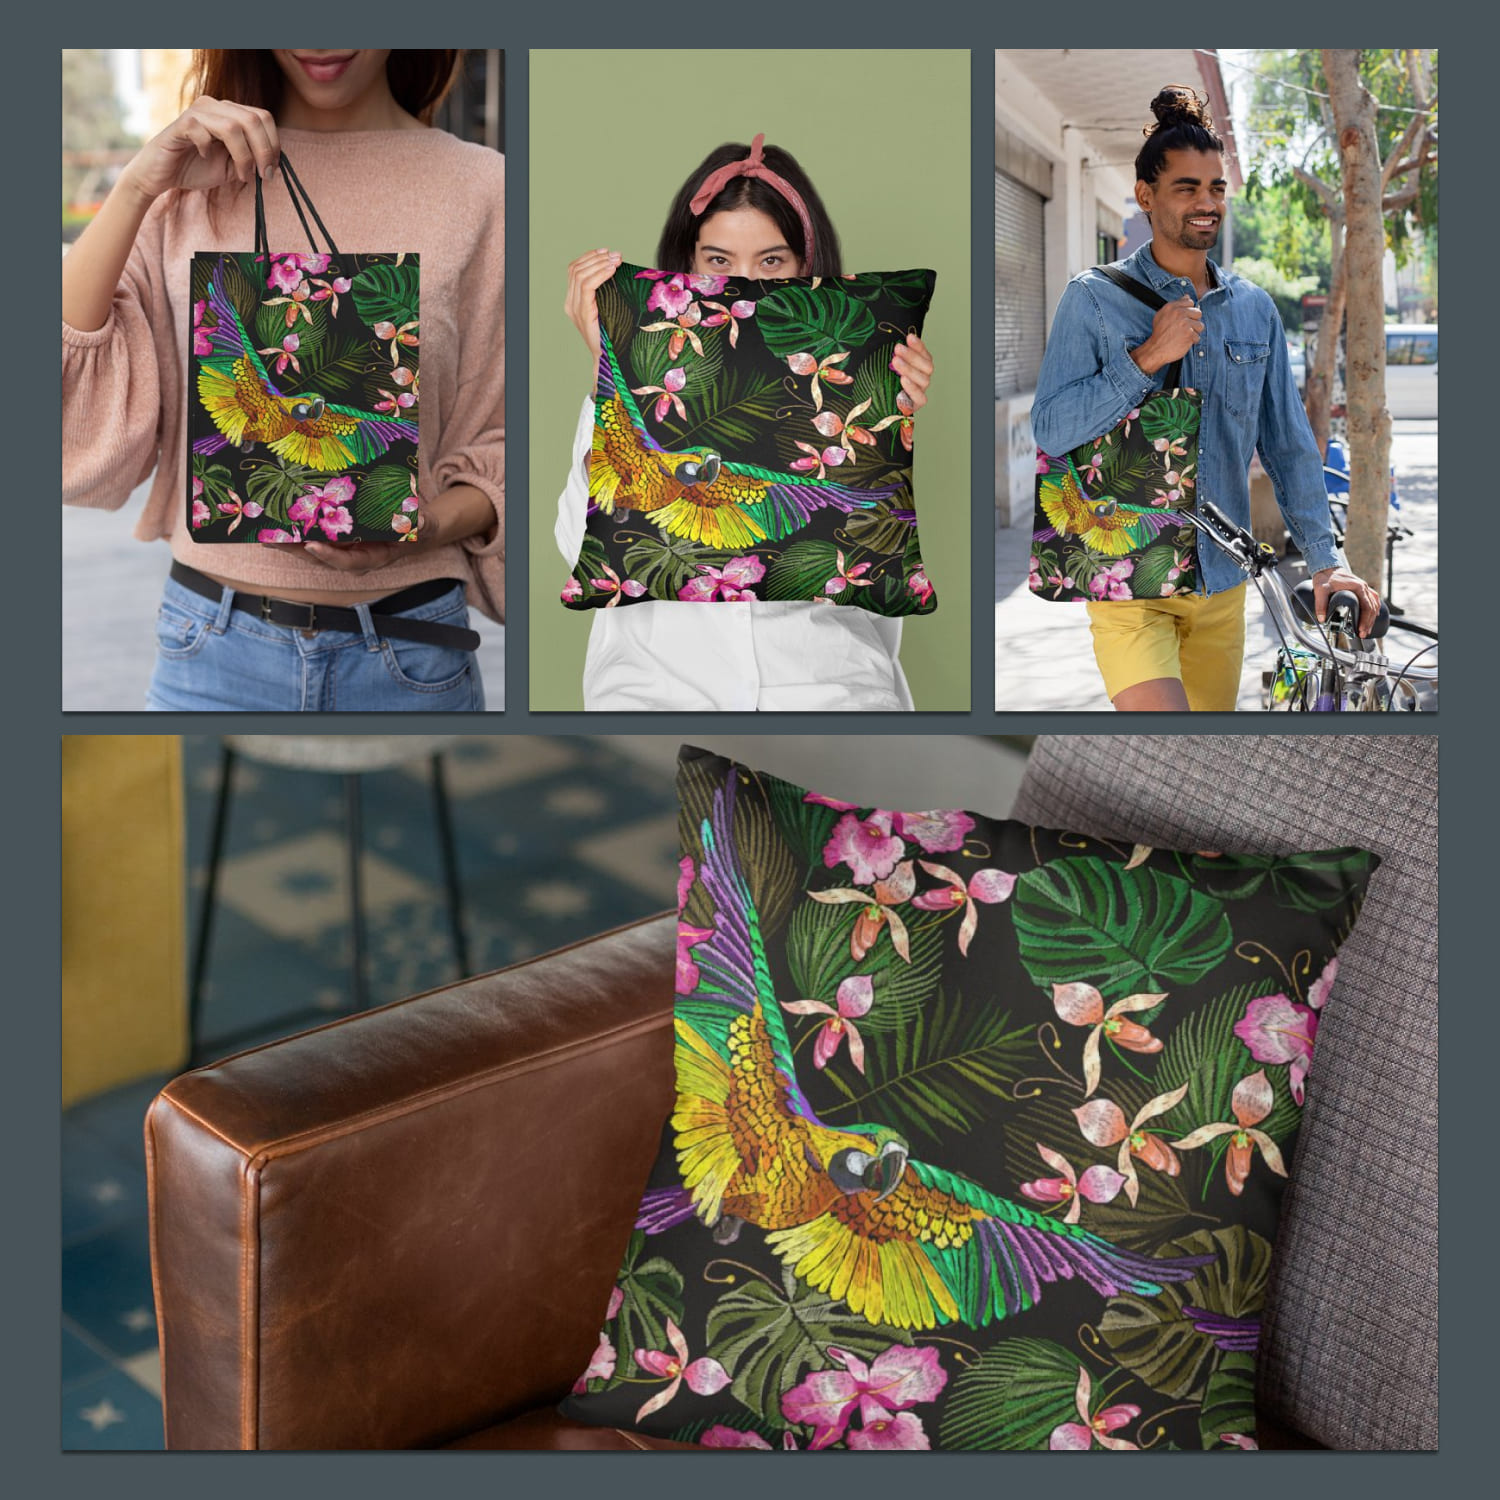 Parrots, orchids and palm leaves created by Matrioshka.